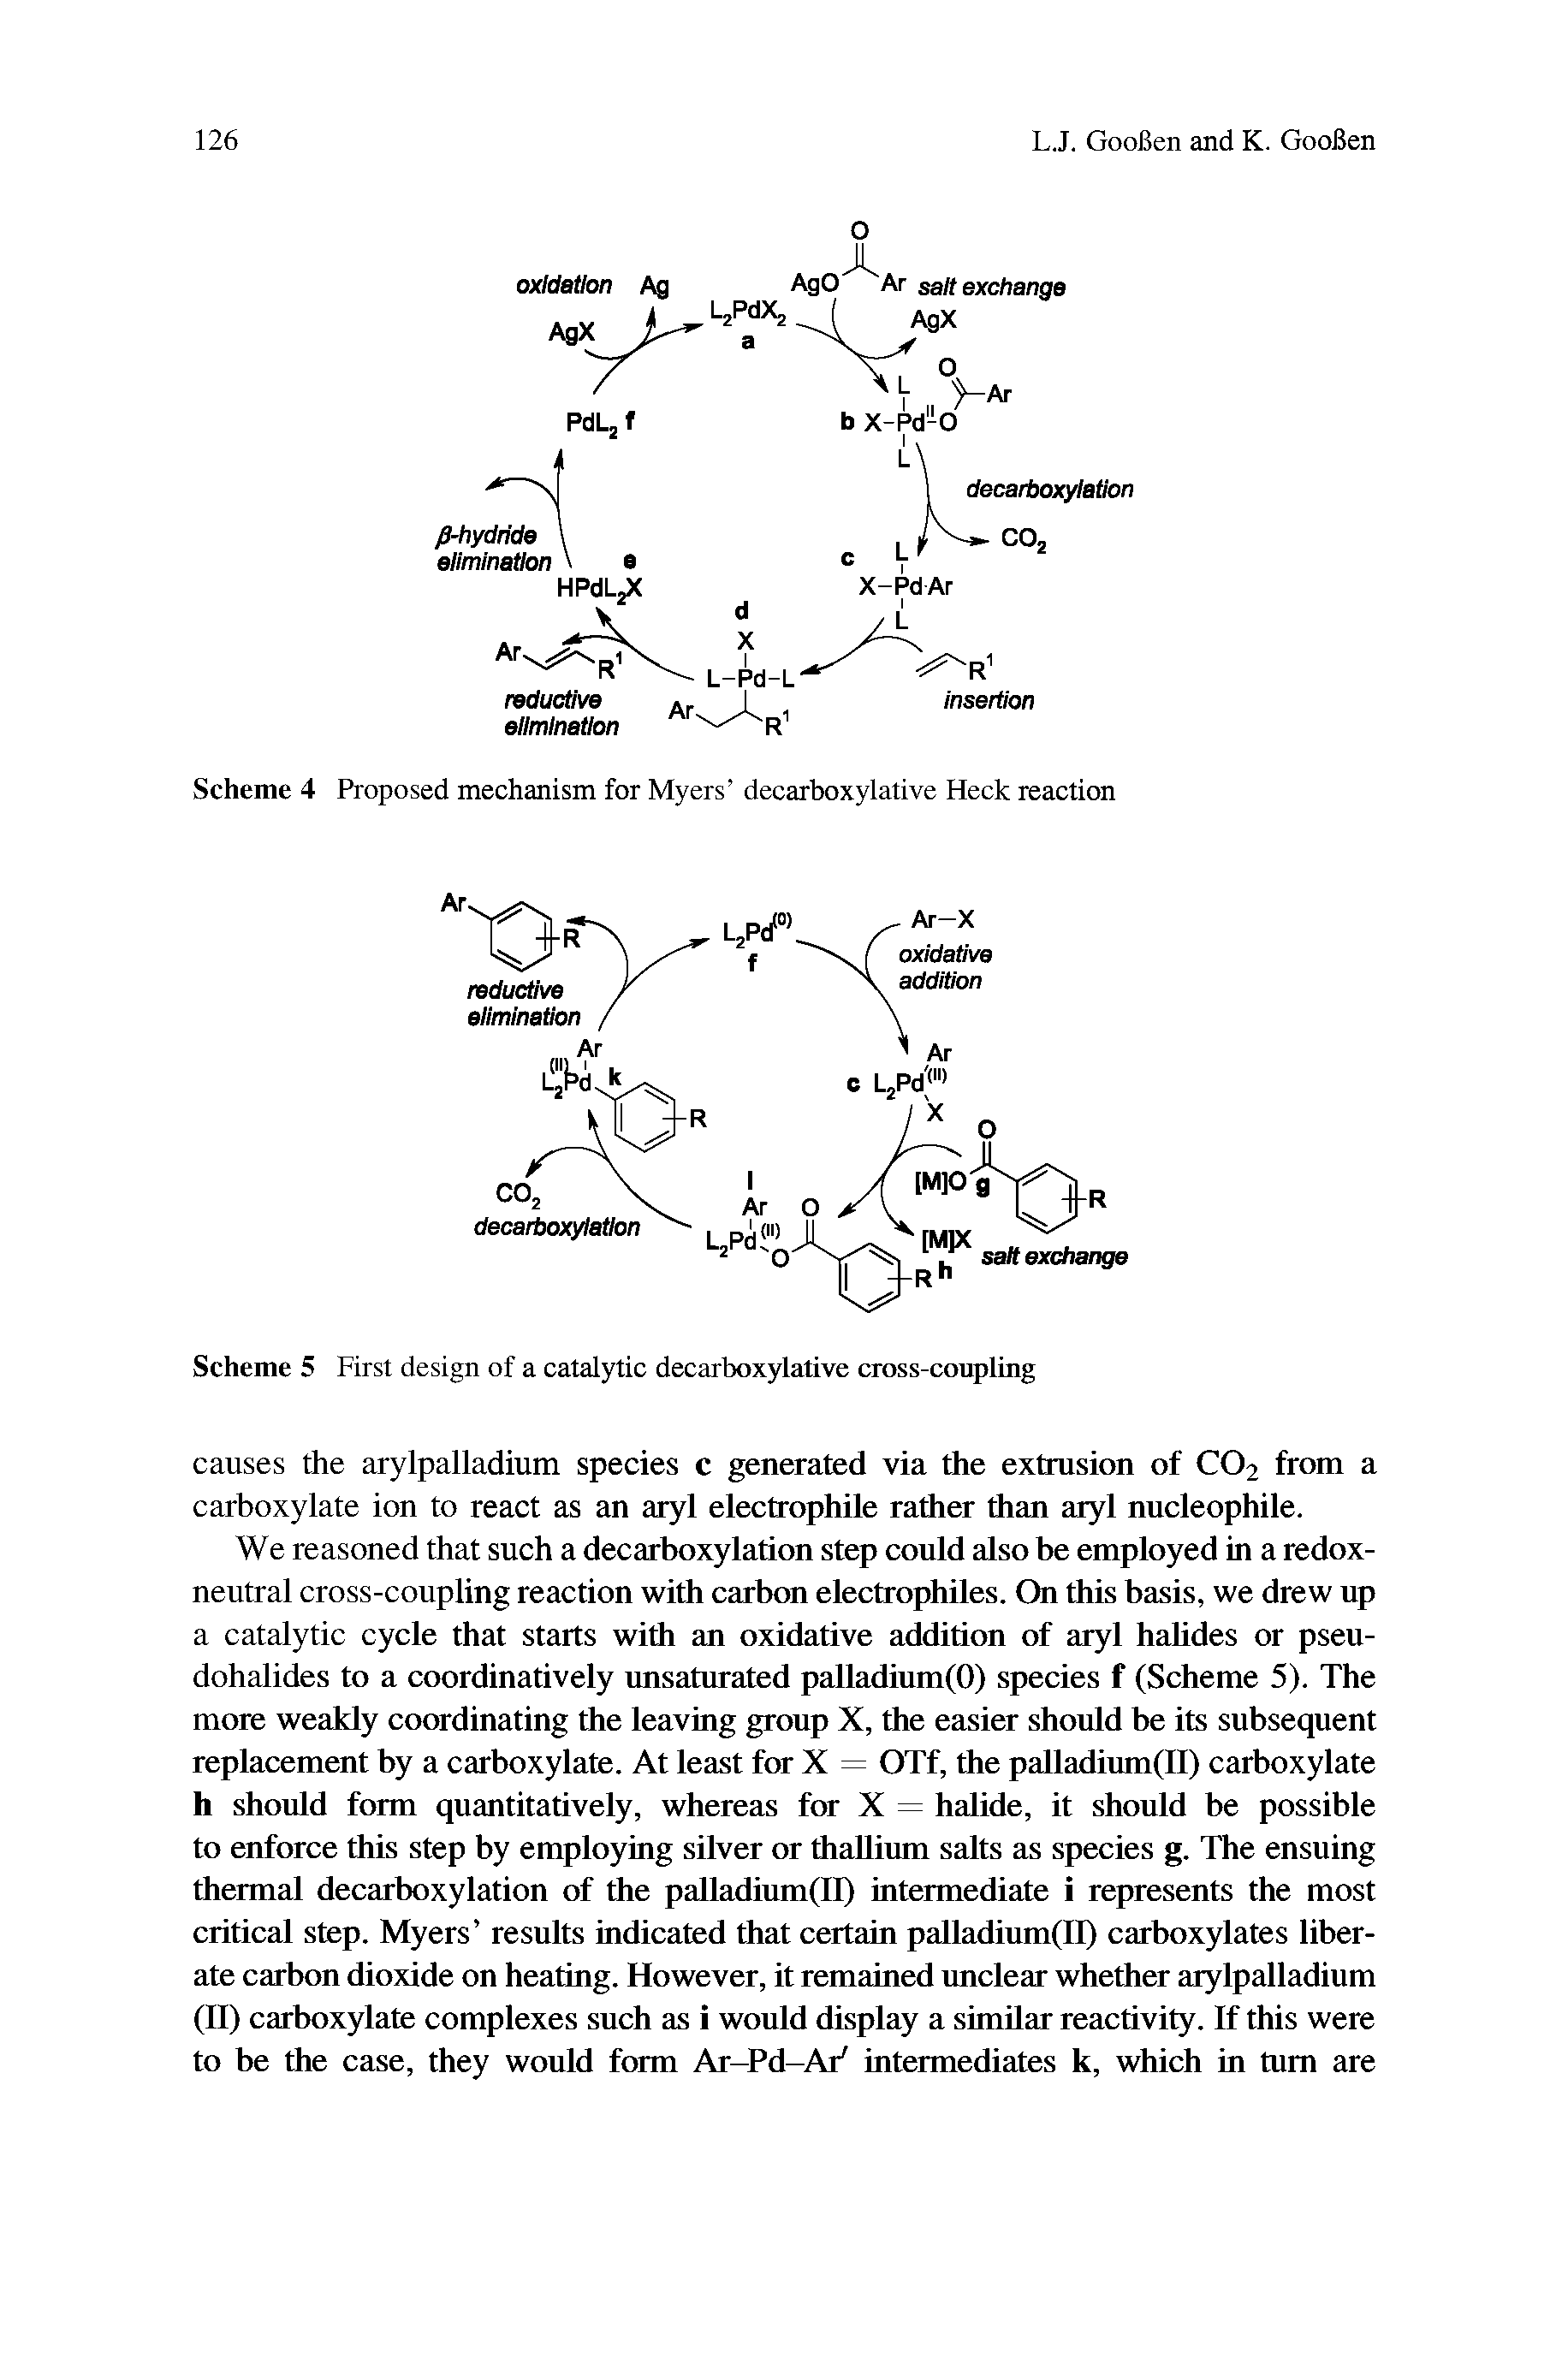 Scheme 5 First design of a catalytic decarboxylative cross-coupling...